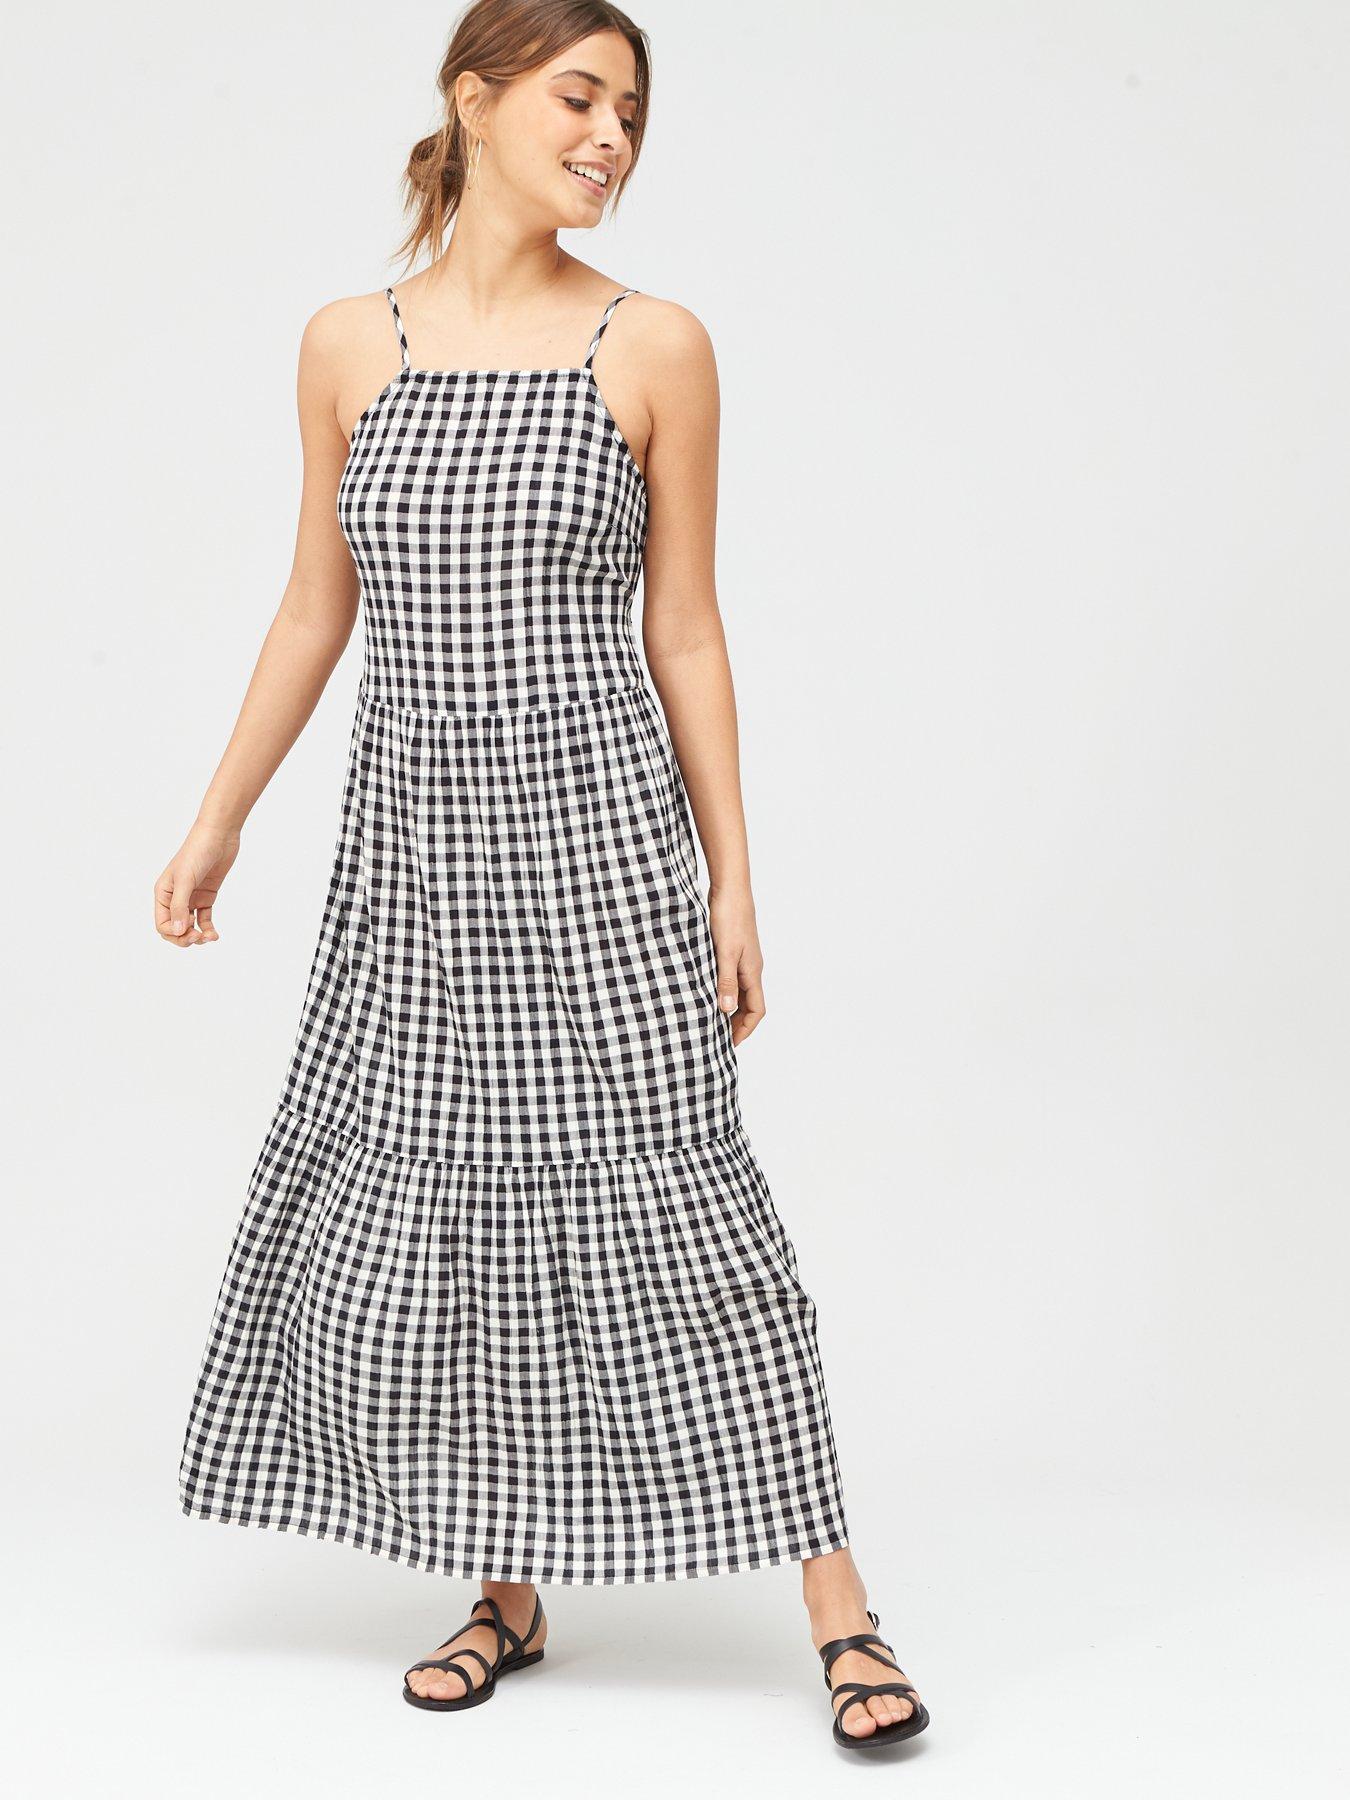 Very Tiered Gingham Dress - Monochrome 